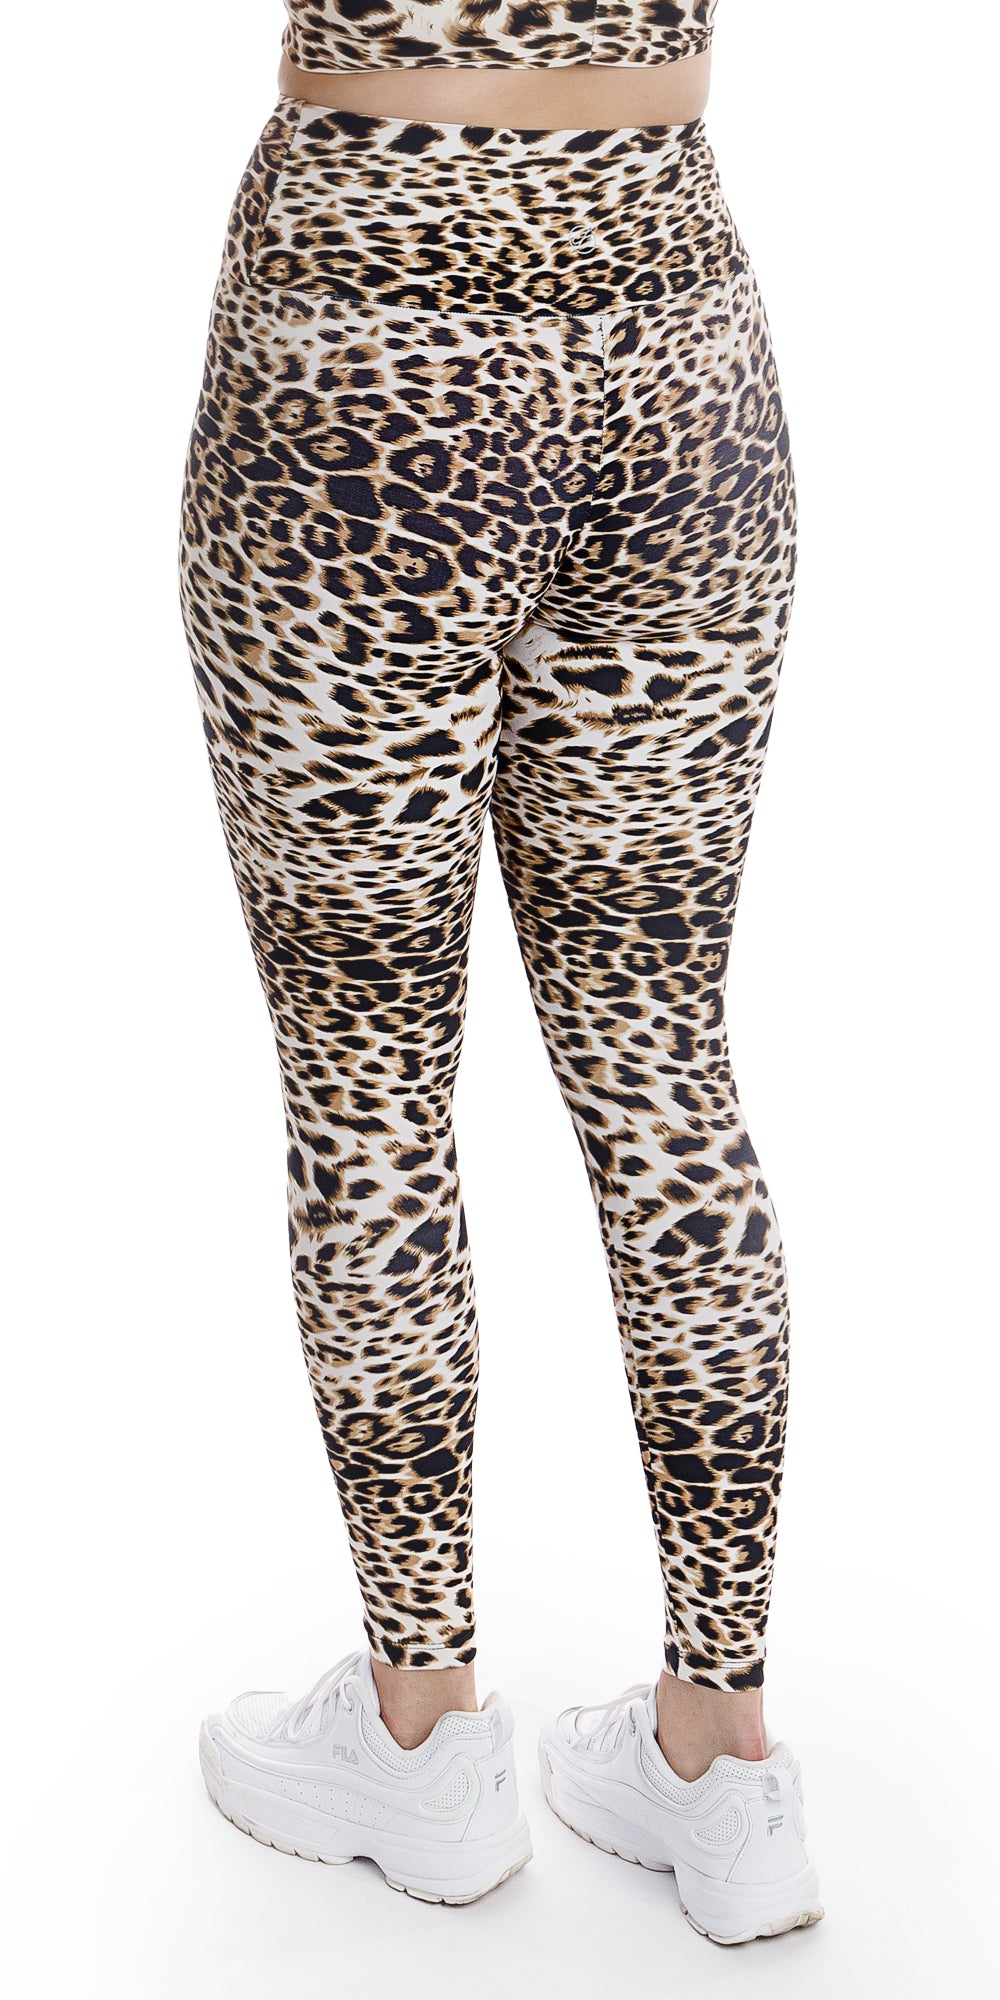 Rear view bottom part of lady in animal print White Cheetah Ultra High Waist Leggings and white shoes